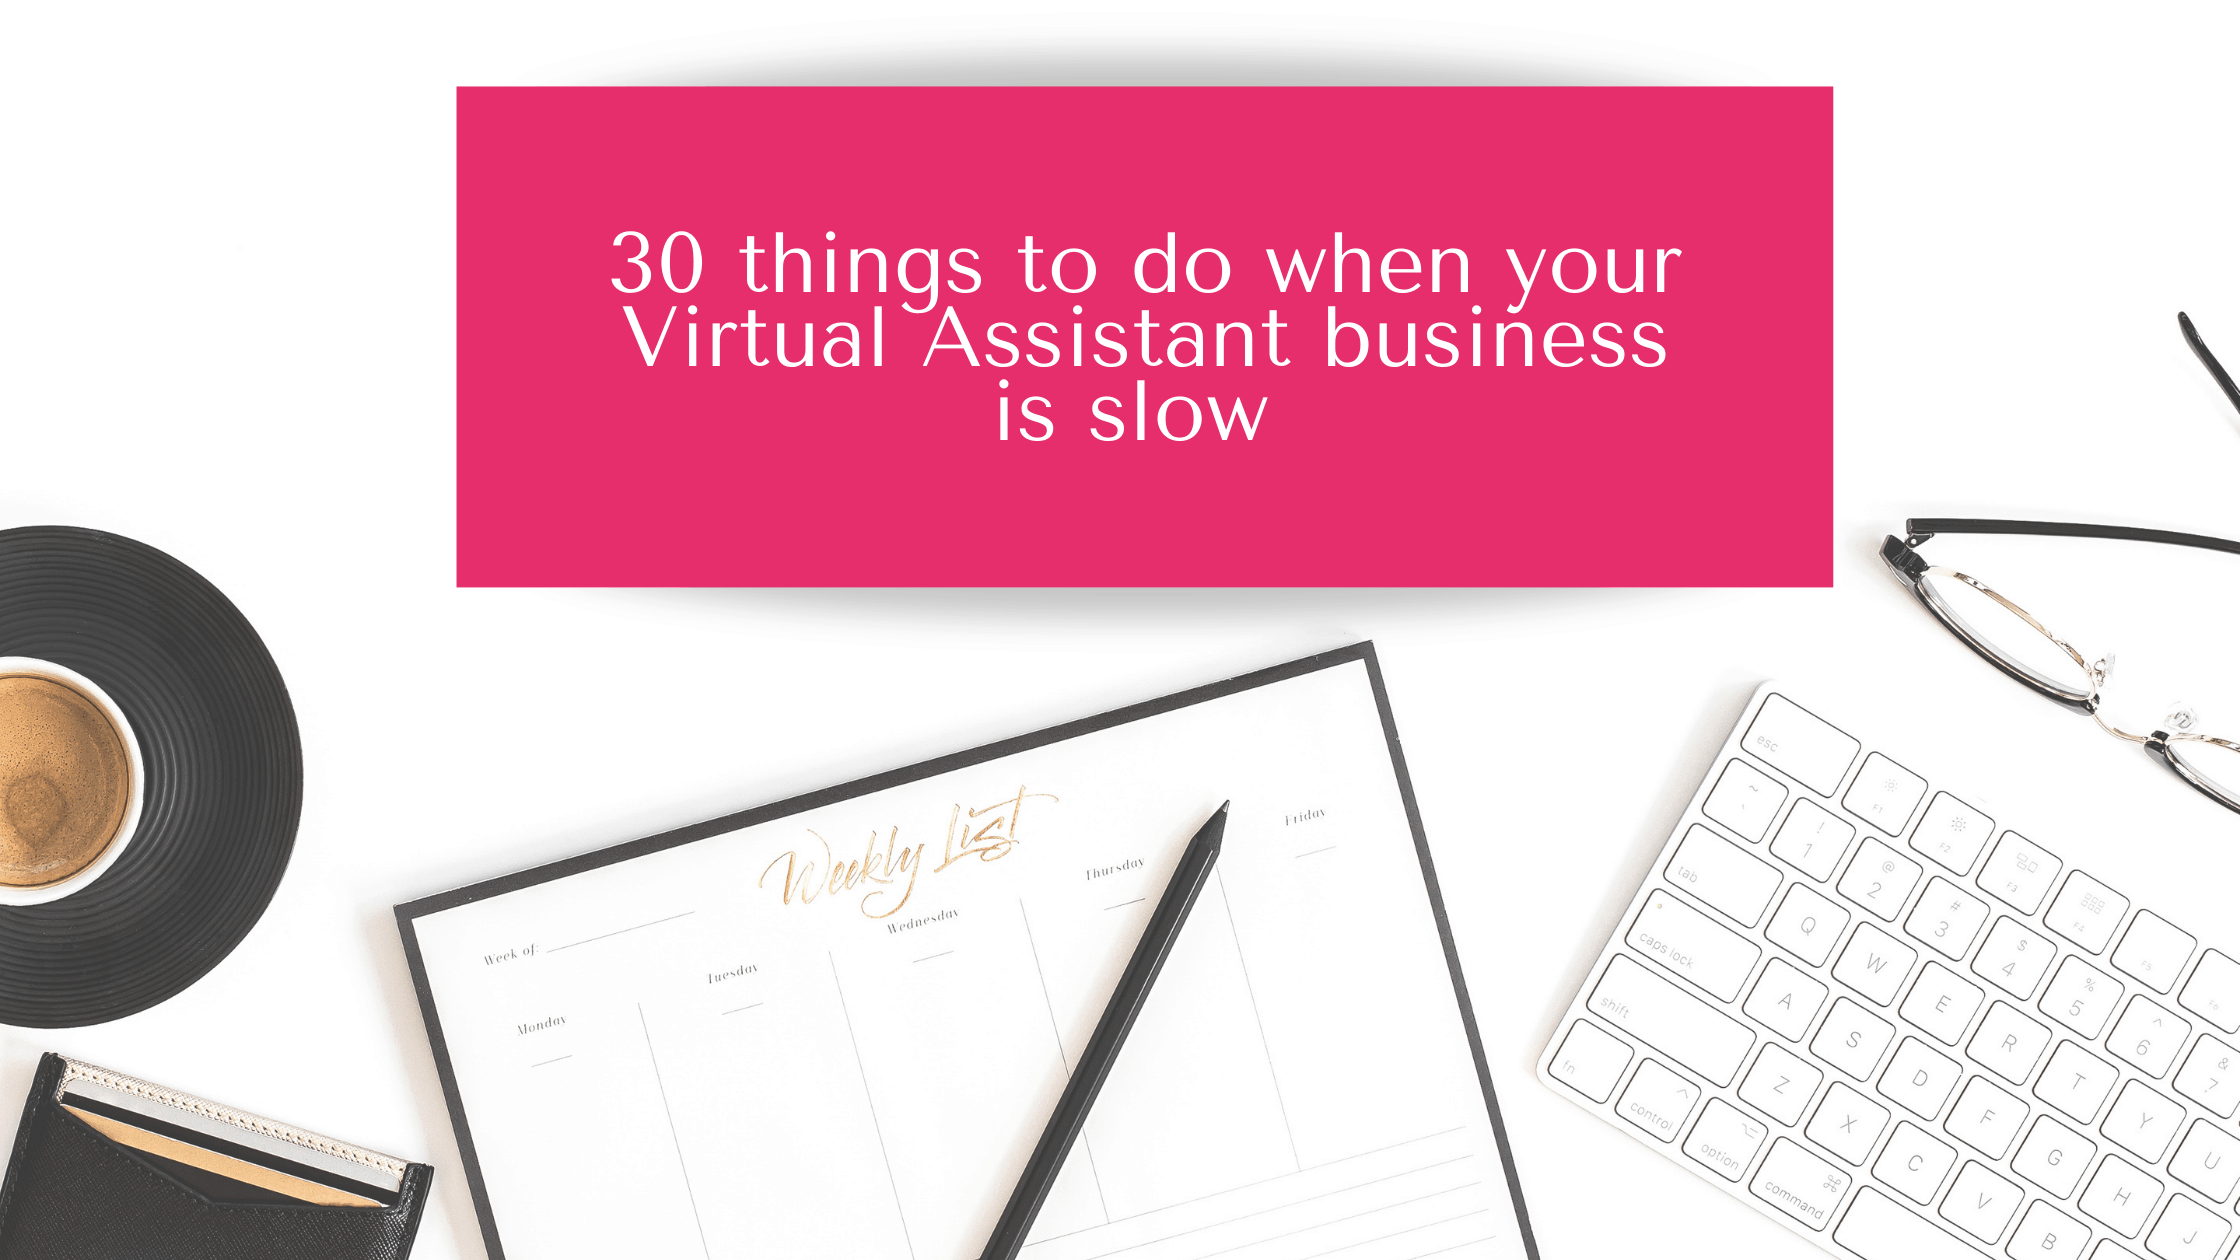 30 things to do when your virtual assistant business is slow